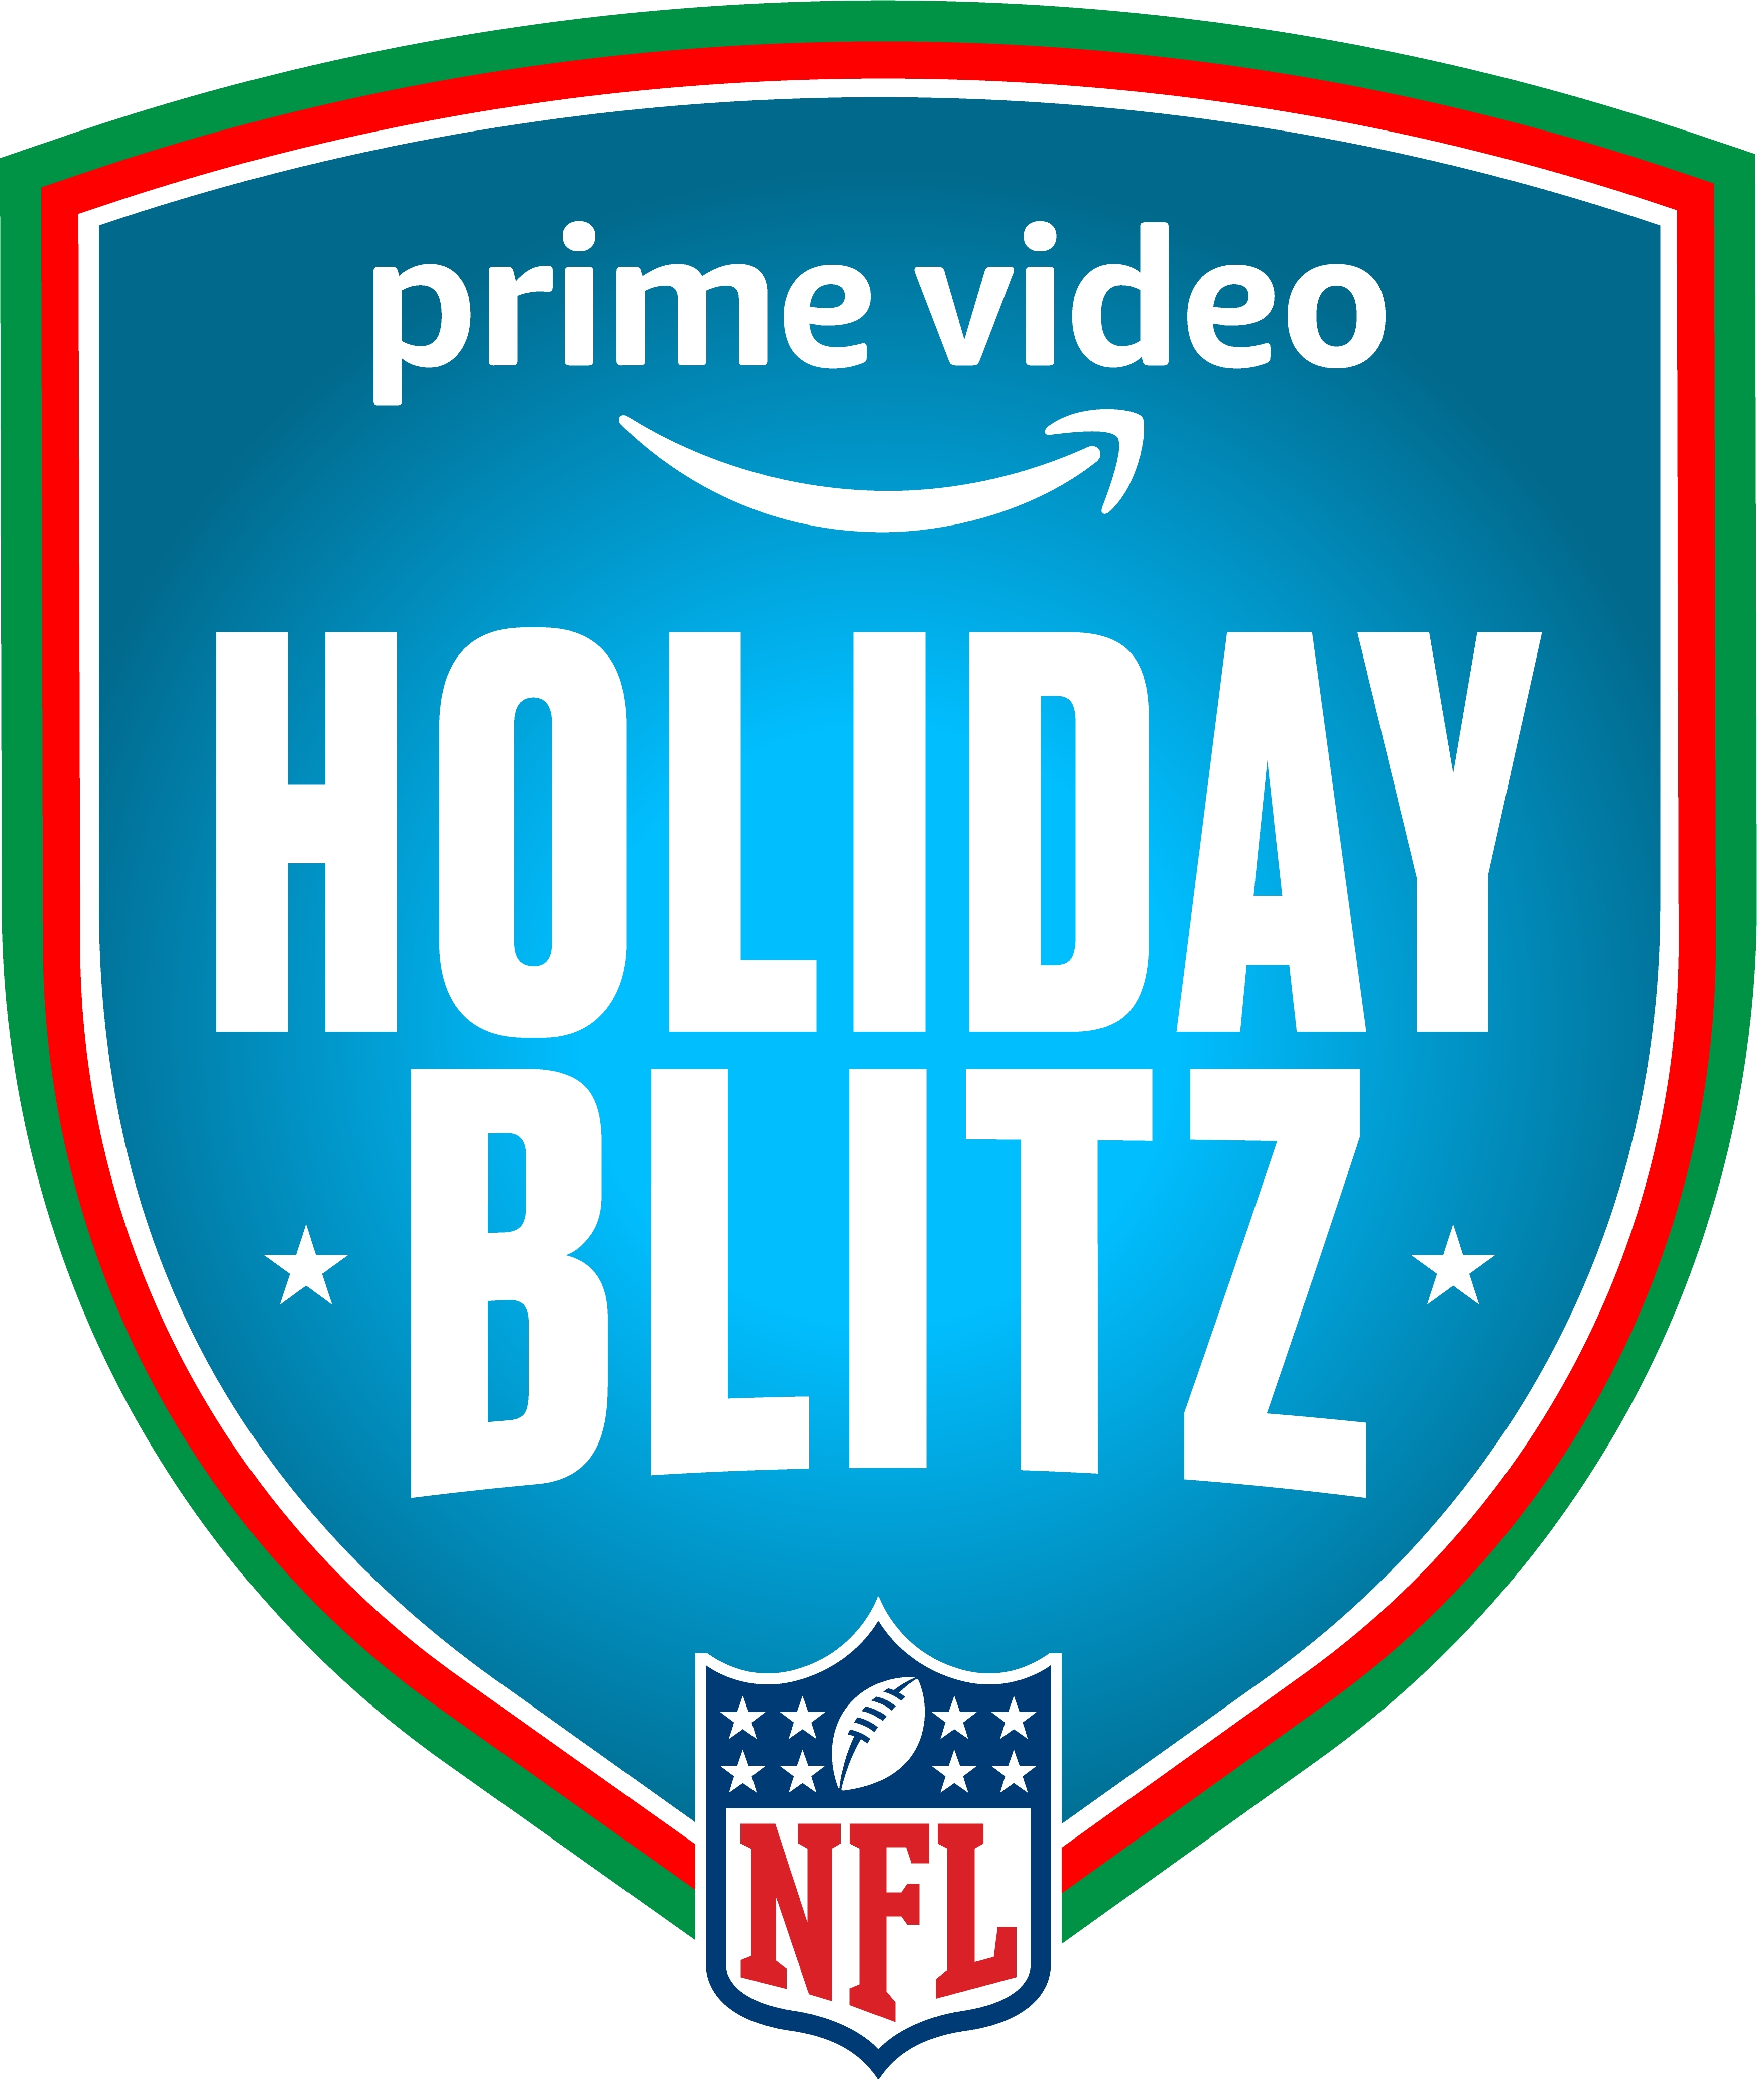 Delivers the Gift of Football to Prime Members—NFL Holiday Blitz on  Prime Video Features Vikings-Saints on Christmas Day Followed by Exclusive  Coverage of 49ers-Cardinals on Dec. 26